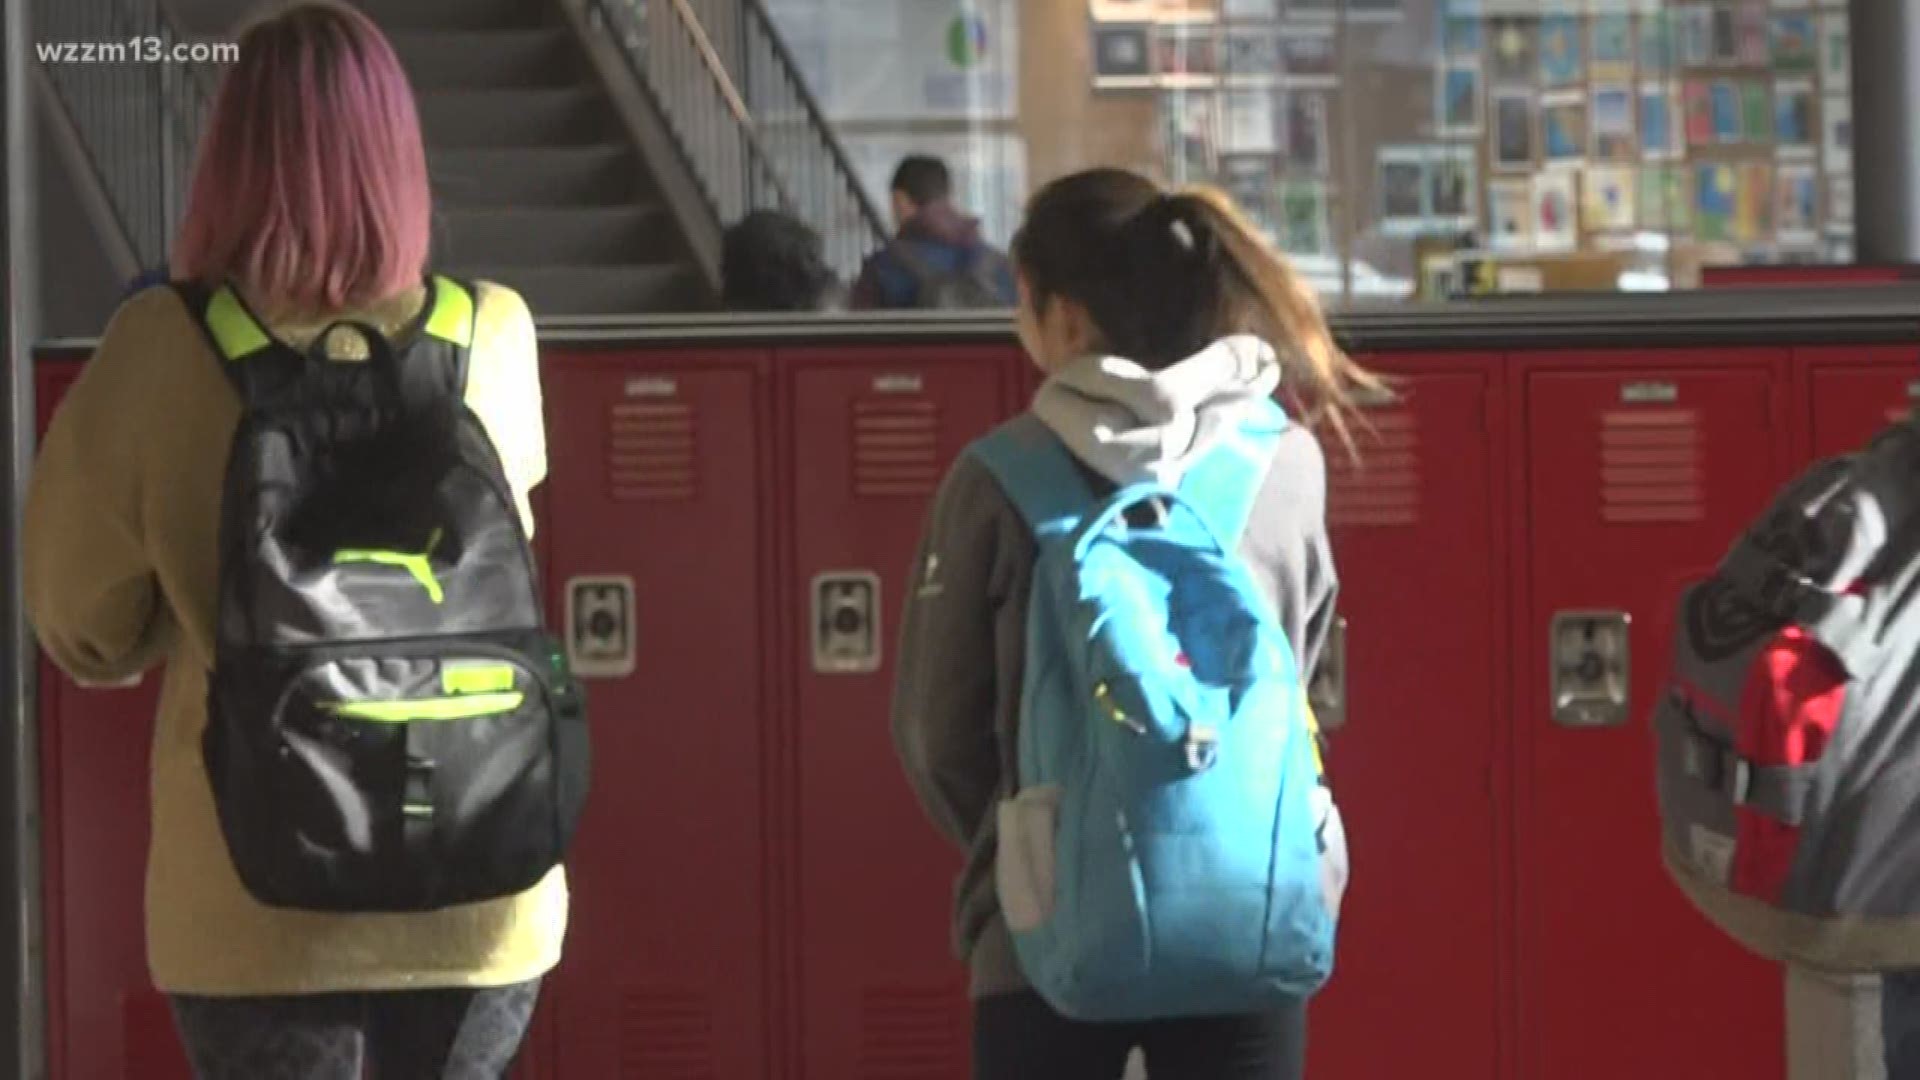 Angela Cunningham was live at North View taking a look at their safety upgrades post-Columbine. It's been 20 years since the tragic school shooting and schools across the nation work hard to protect their students.